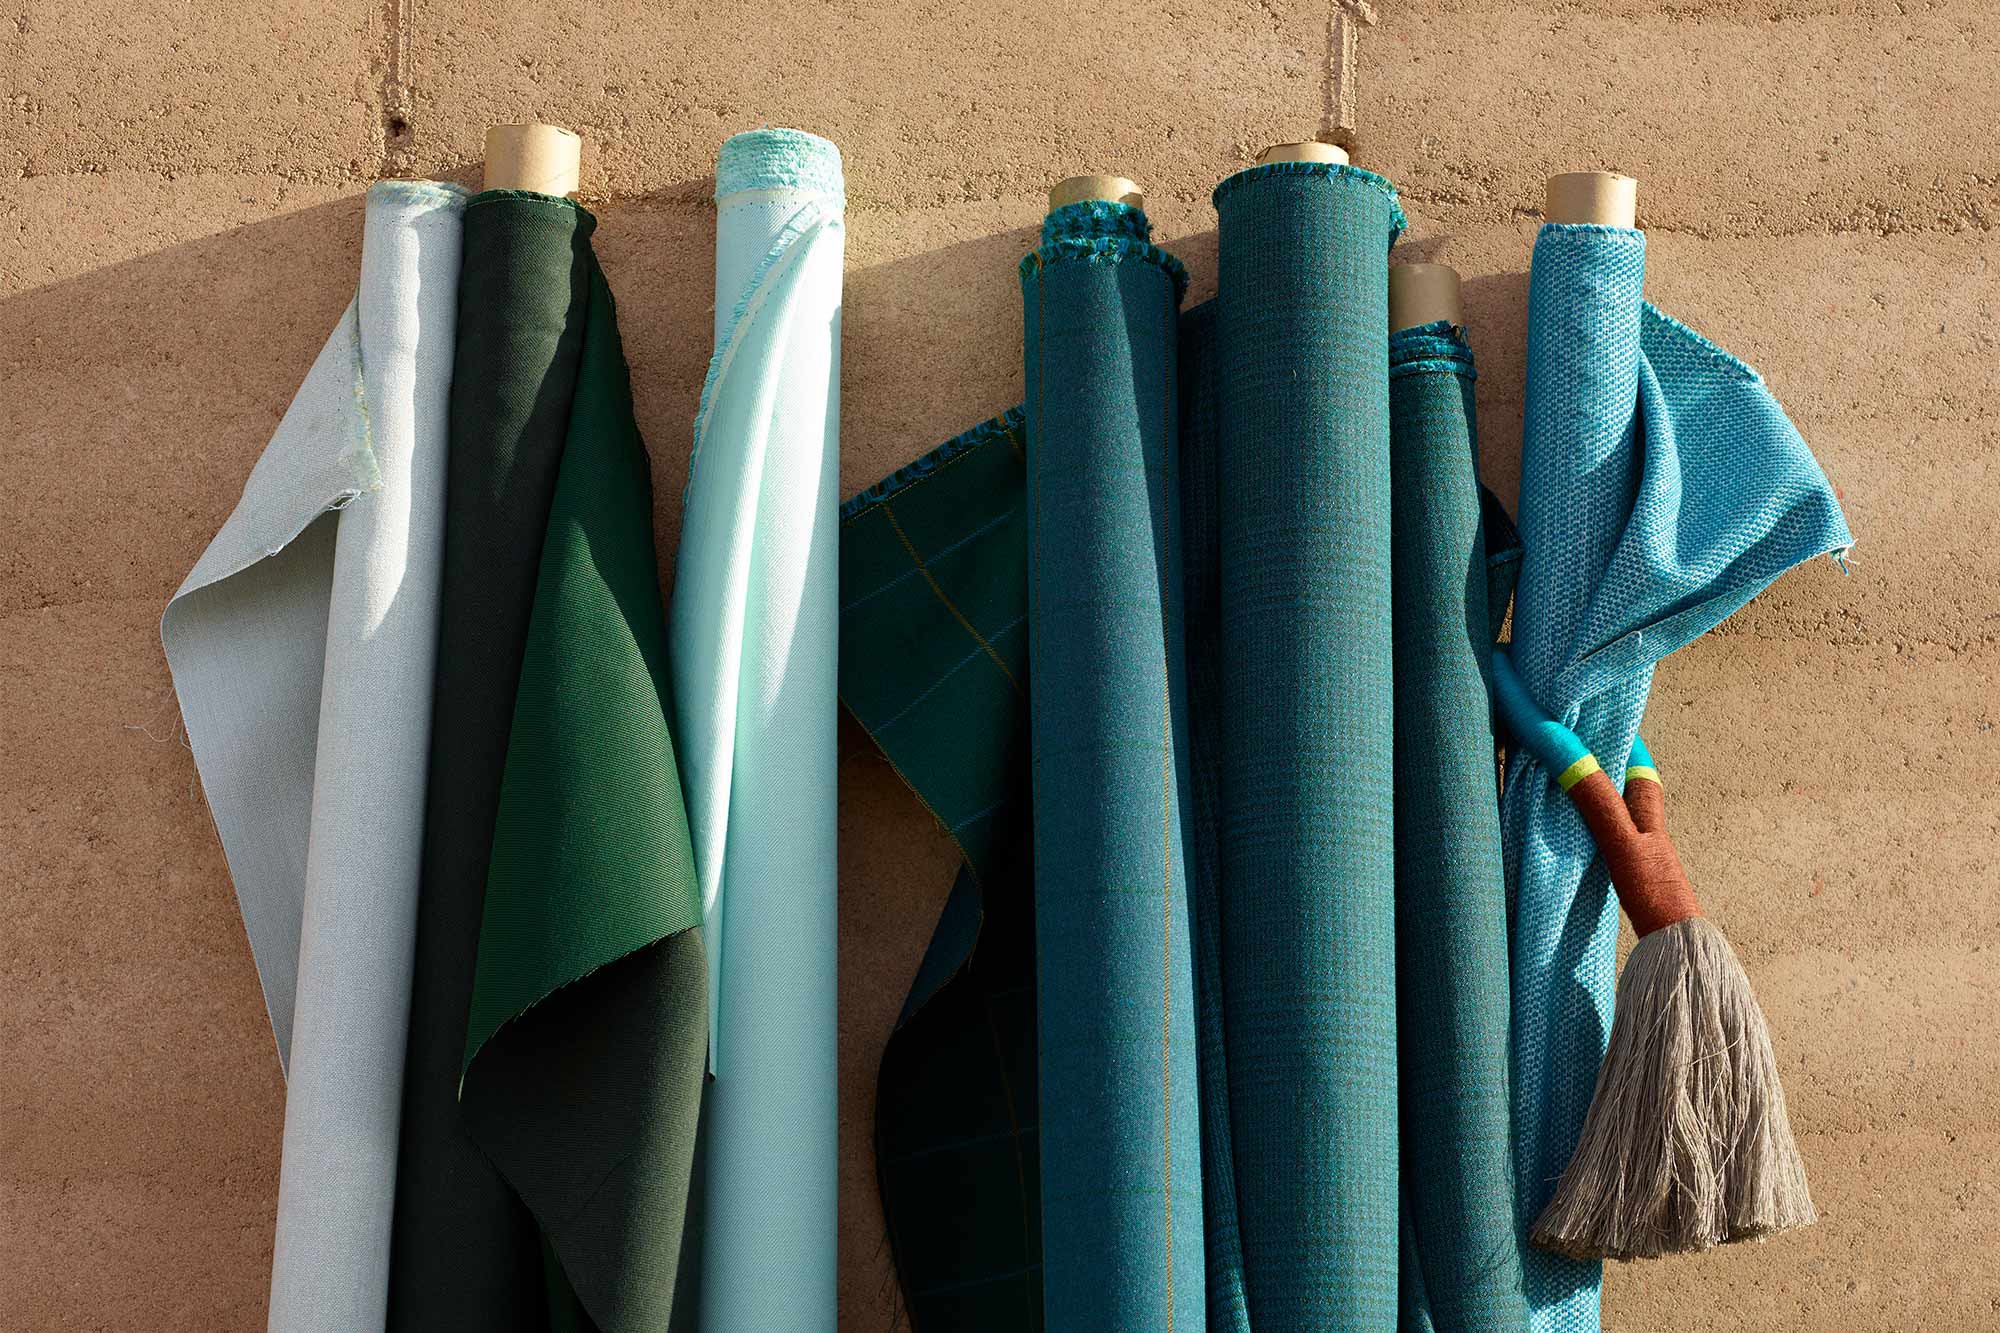 Rolls of teal Sunbrella upholstery fabrics against outside wall